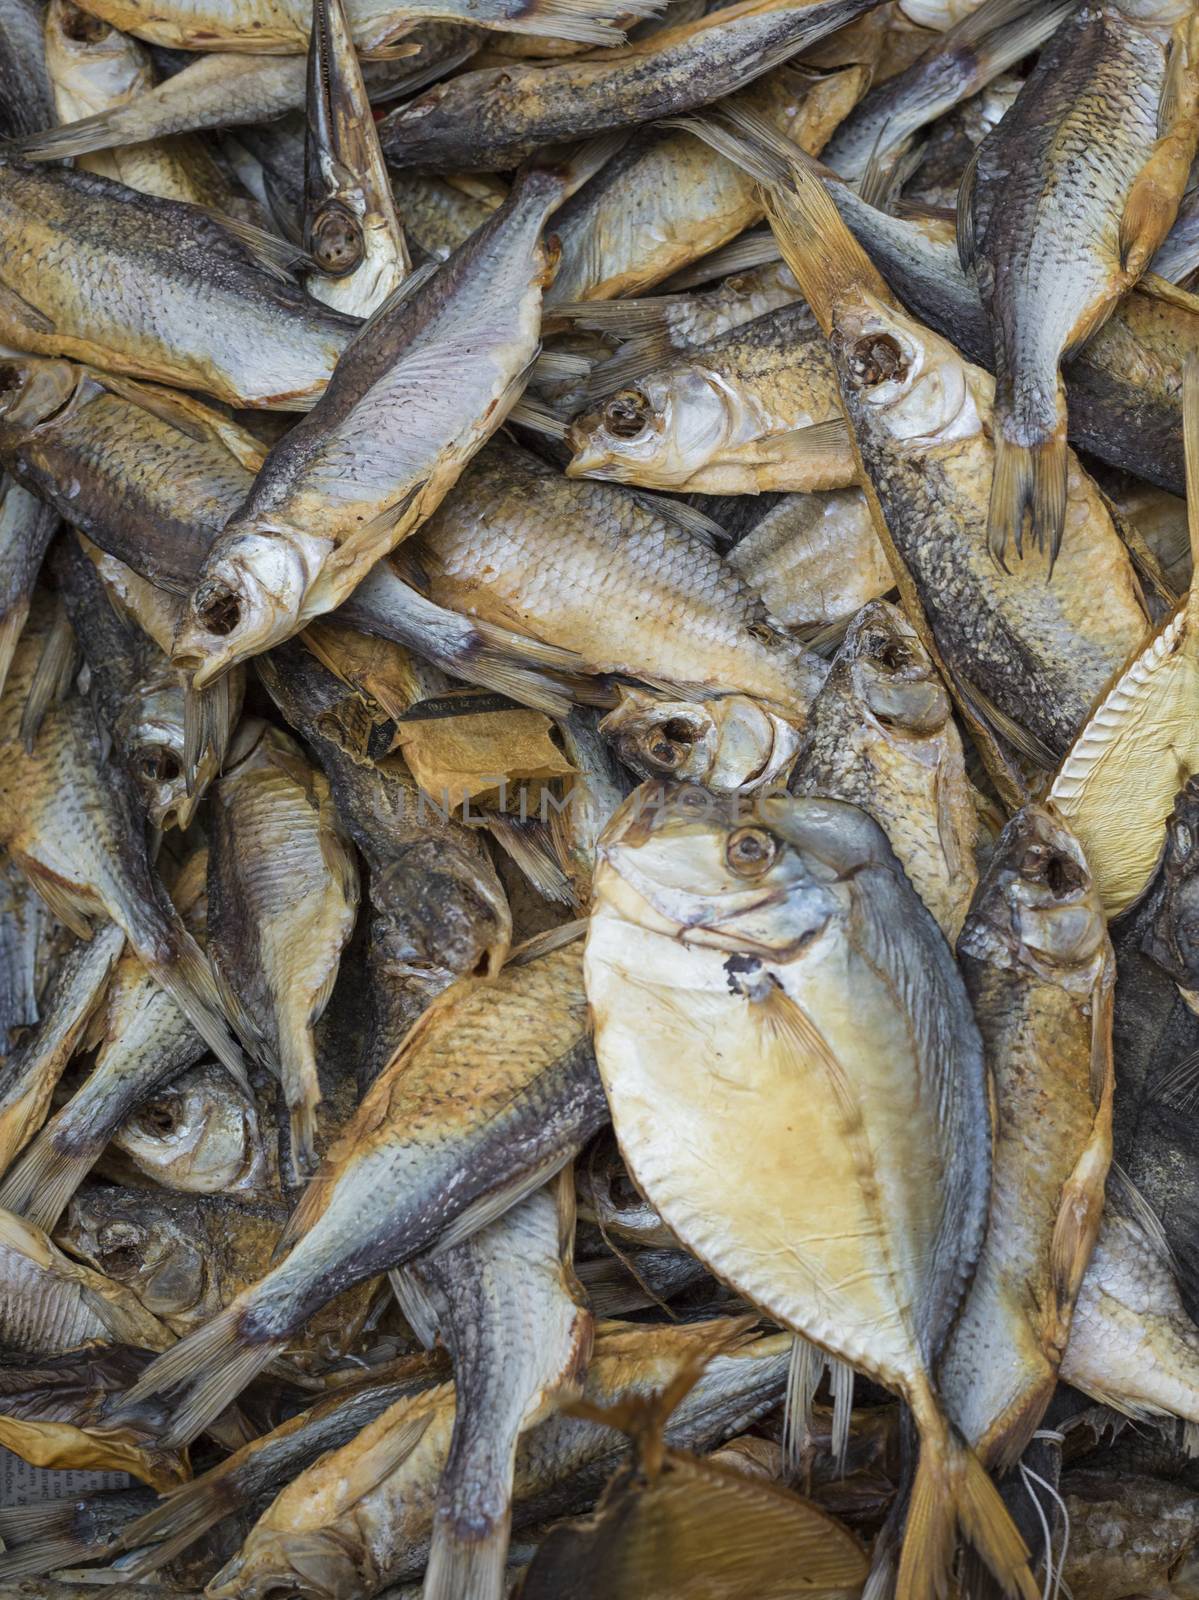 Dried salted fish at a farmers market in Odessa, Ukraine. by mariusz_prusaczyk